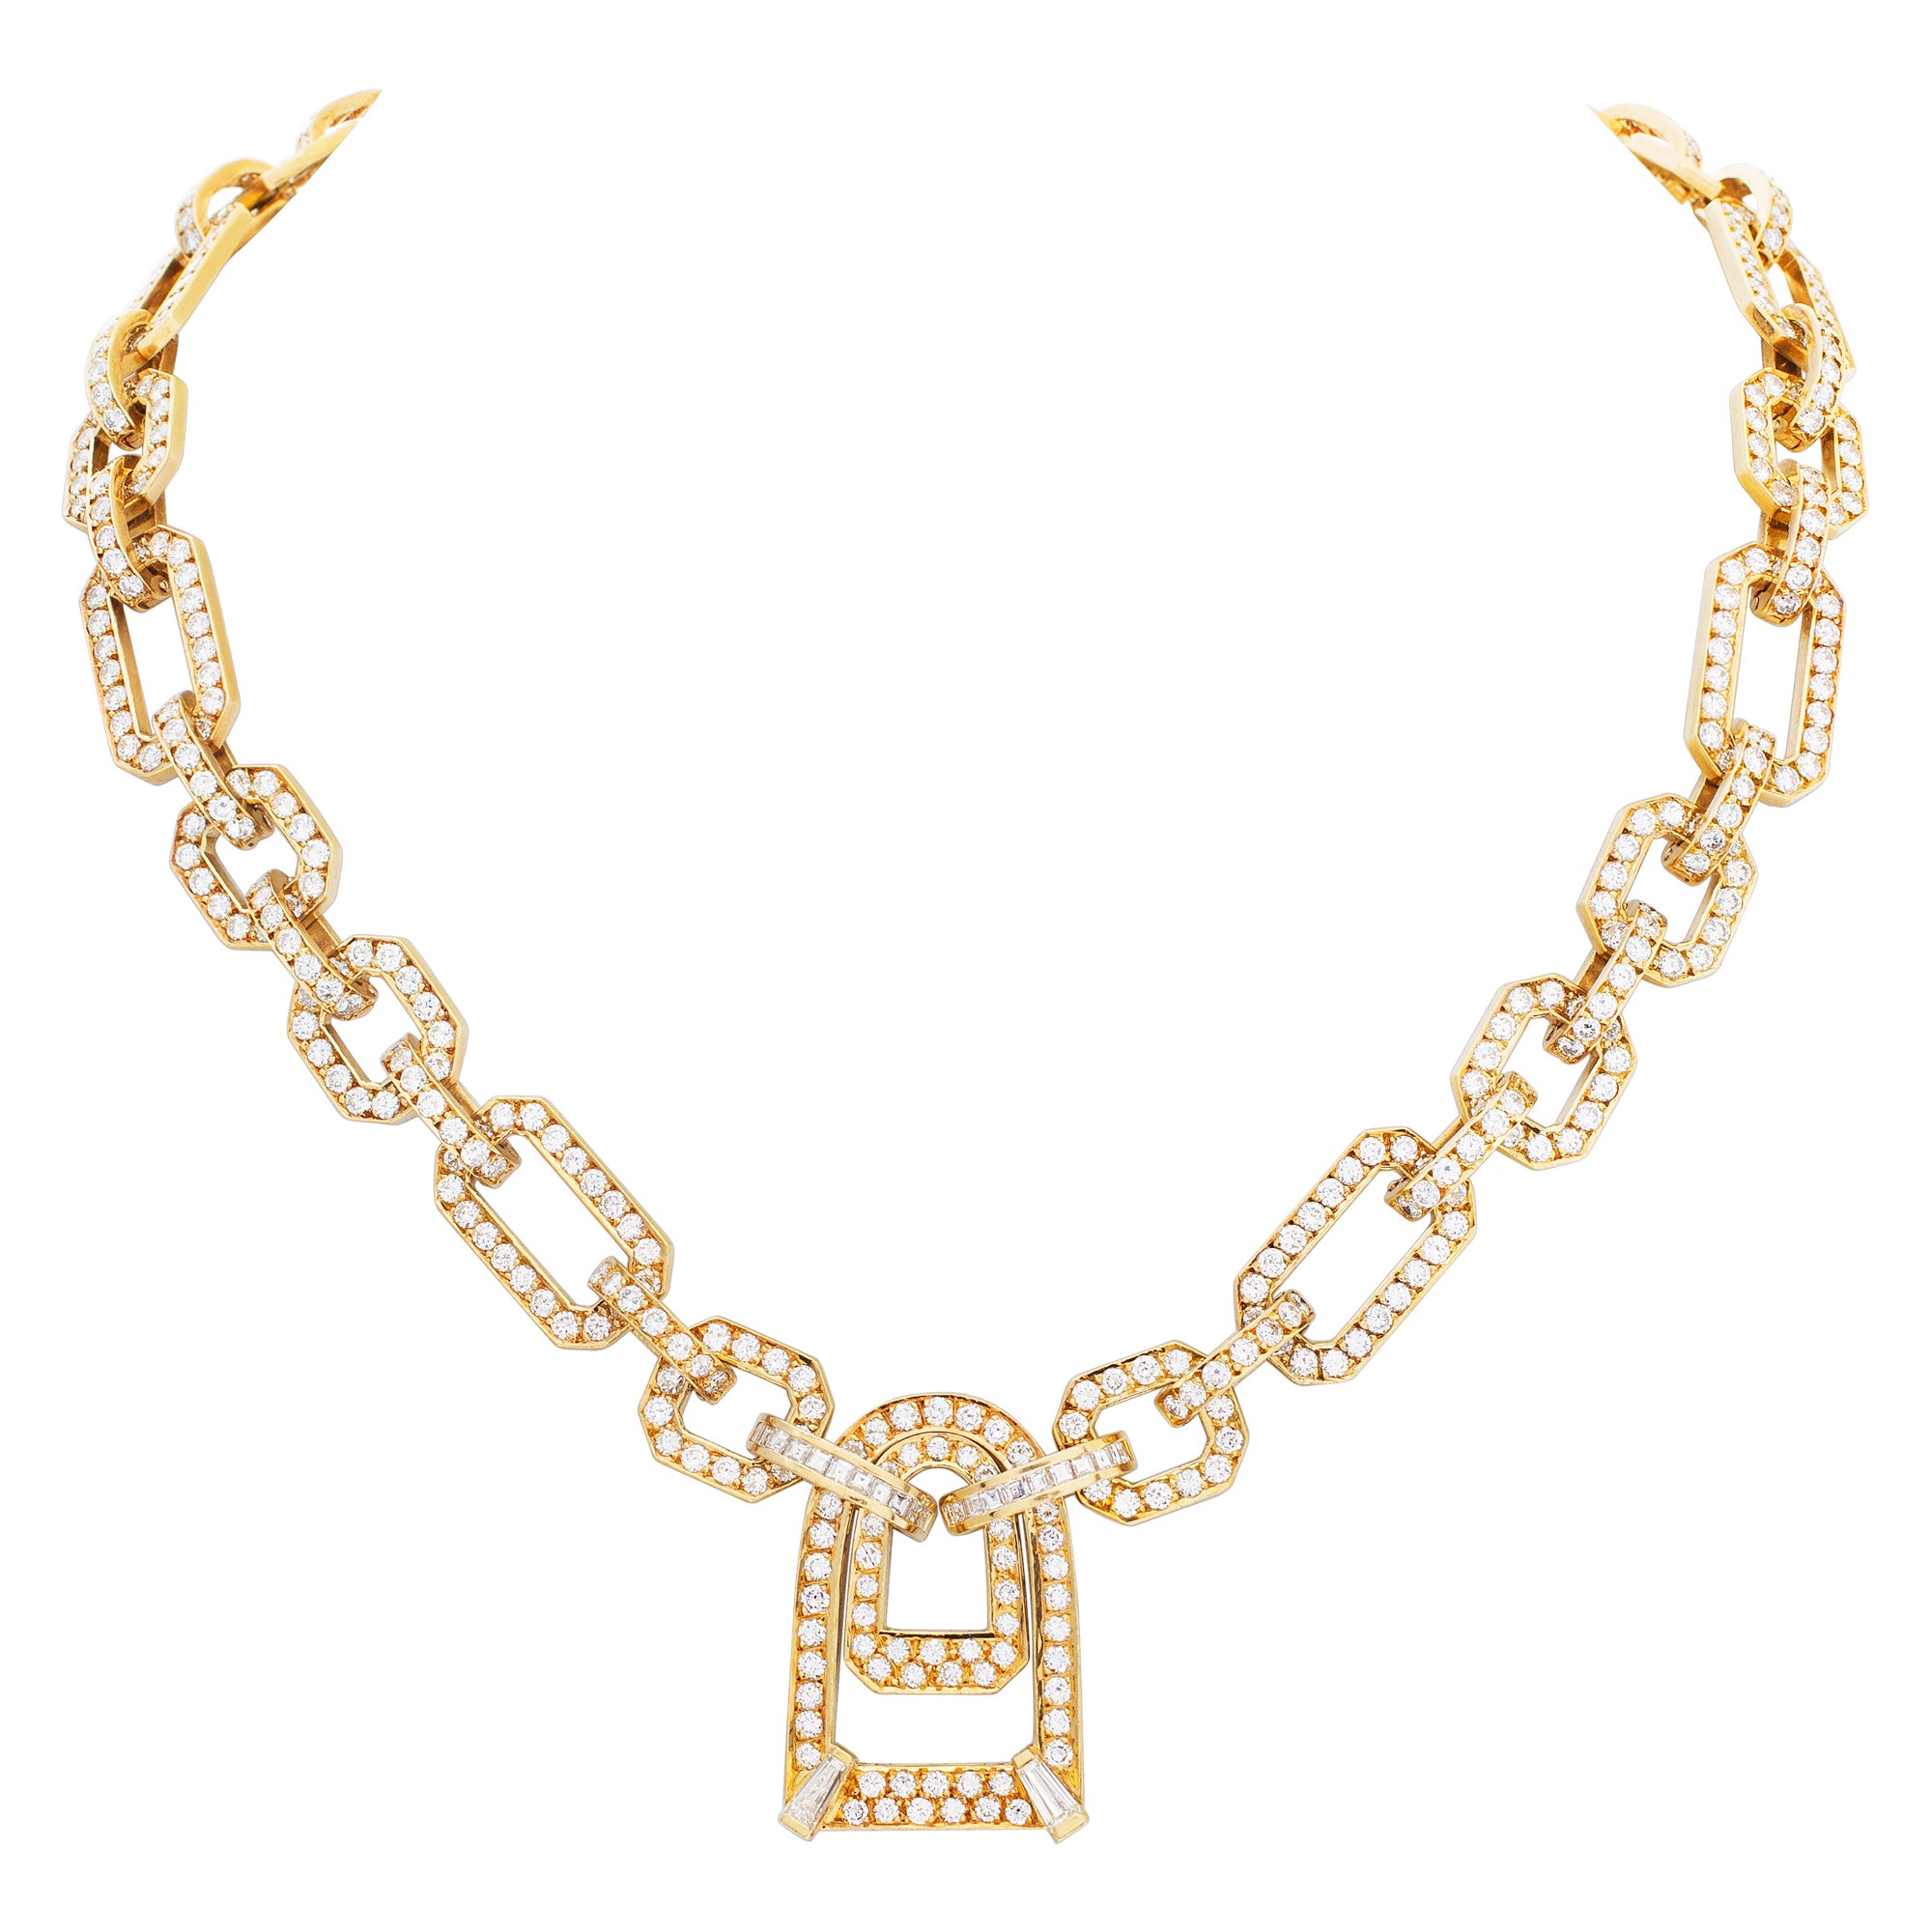 Geometric Necklace with Approx. 14 Carats, Full Cut Round Brilliant and Baguette